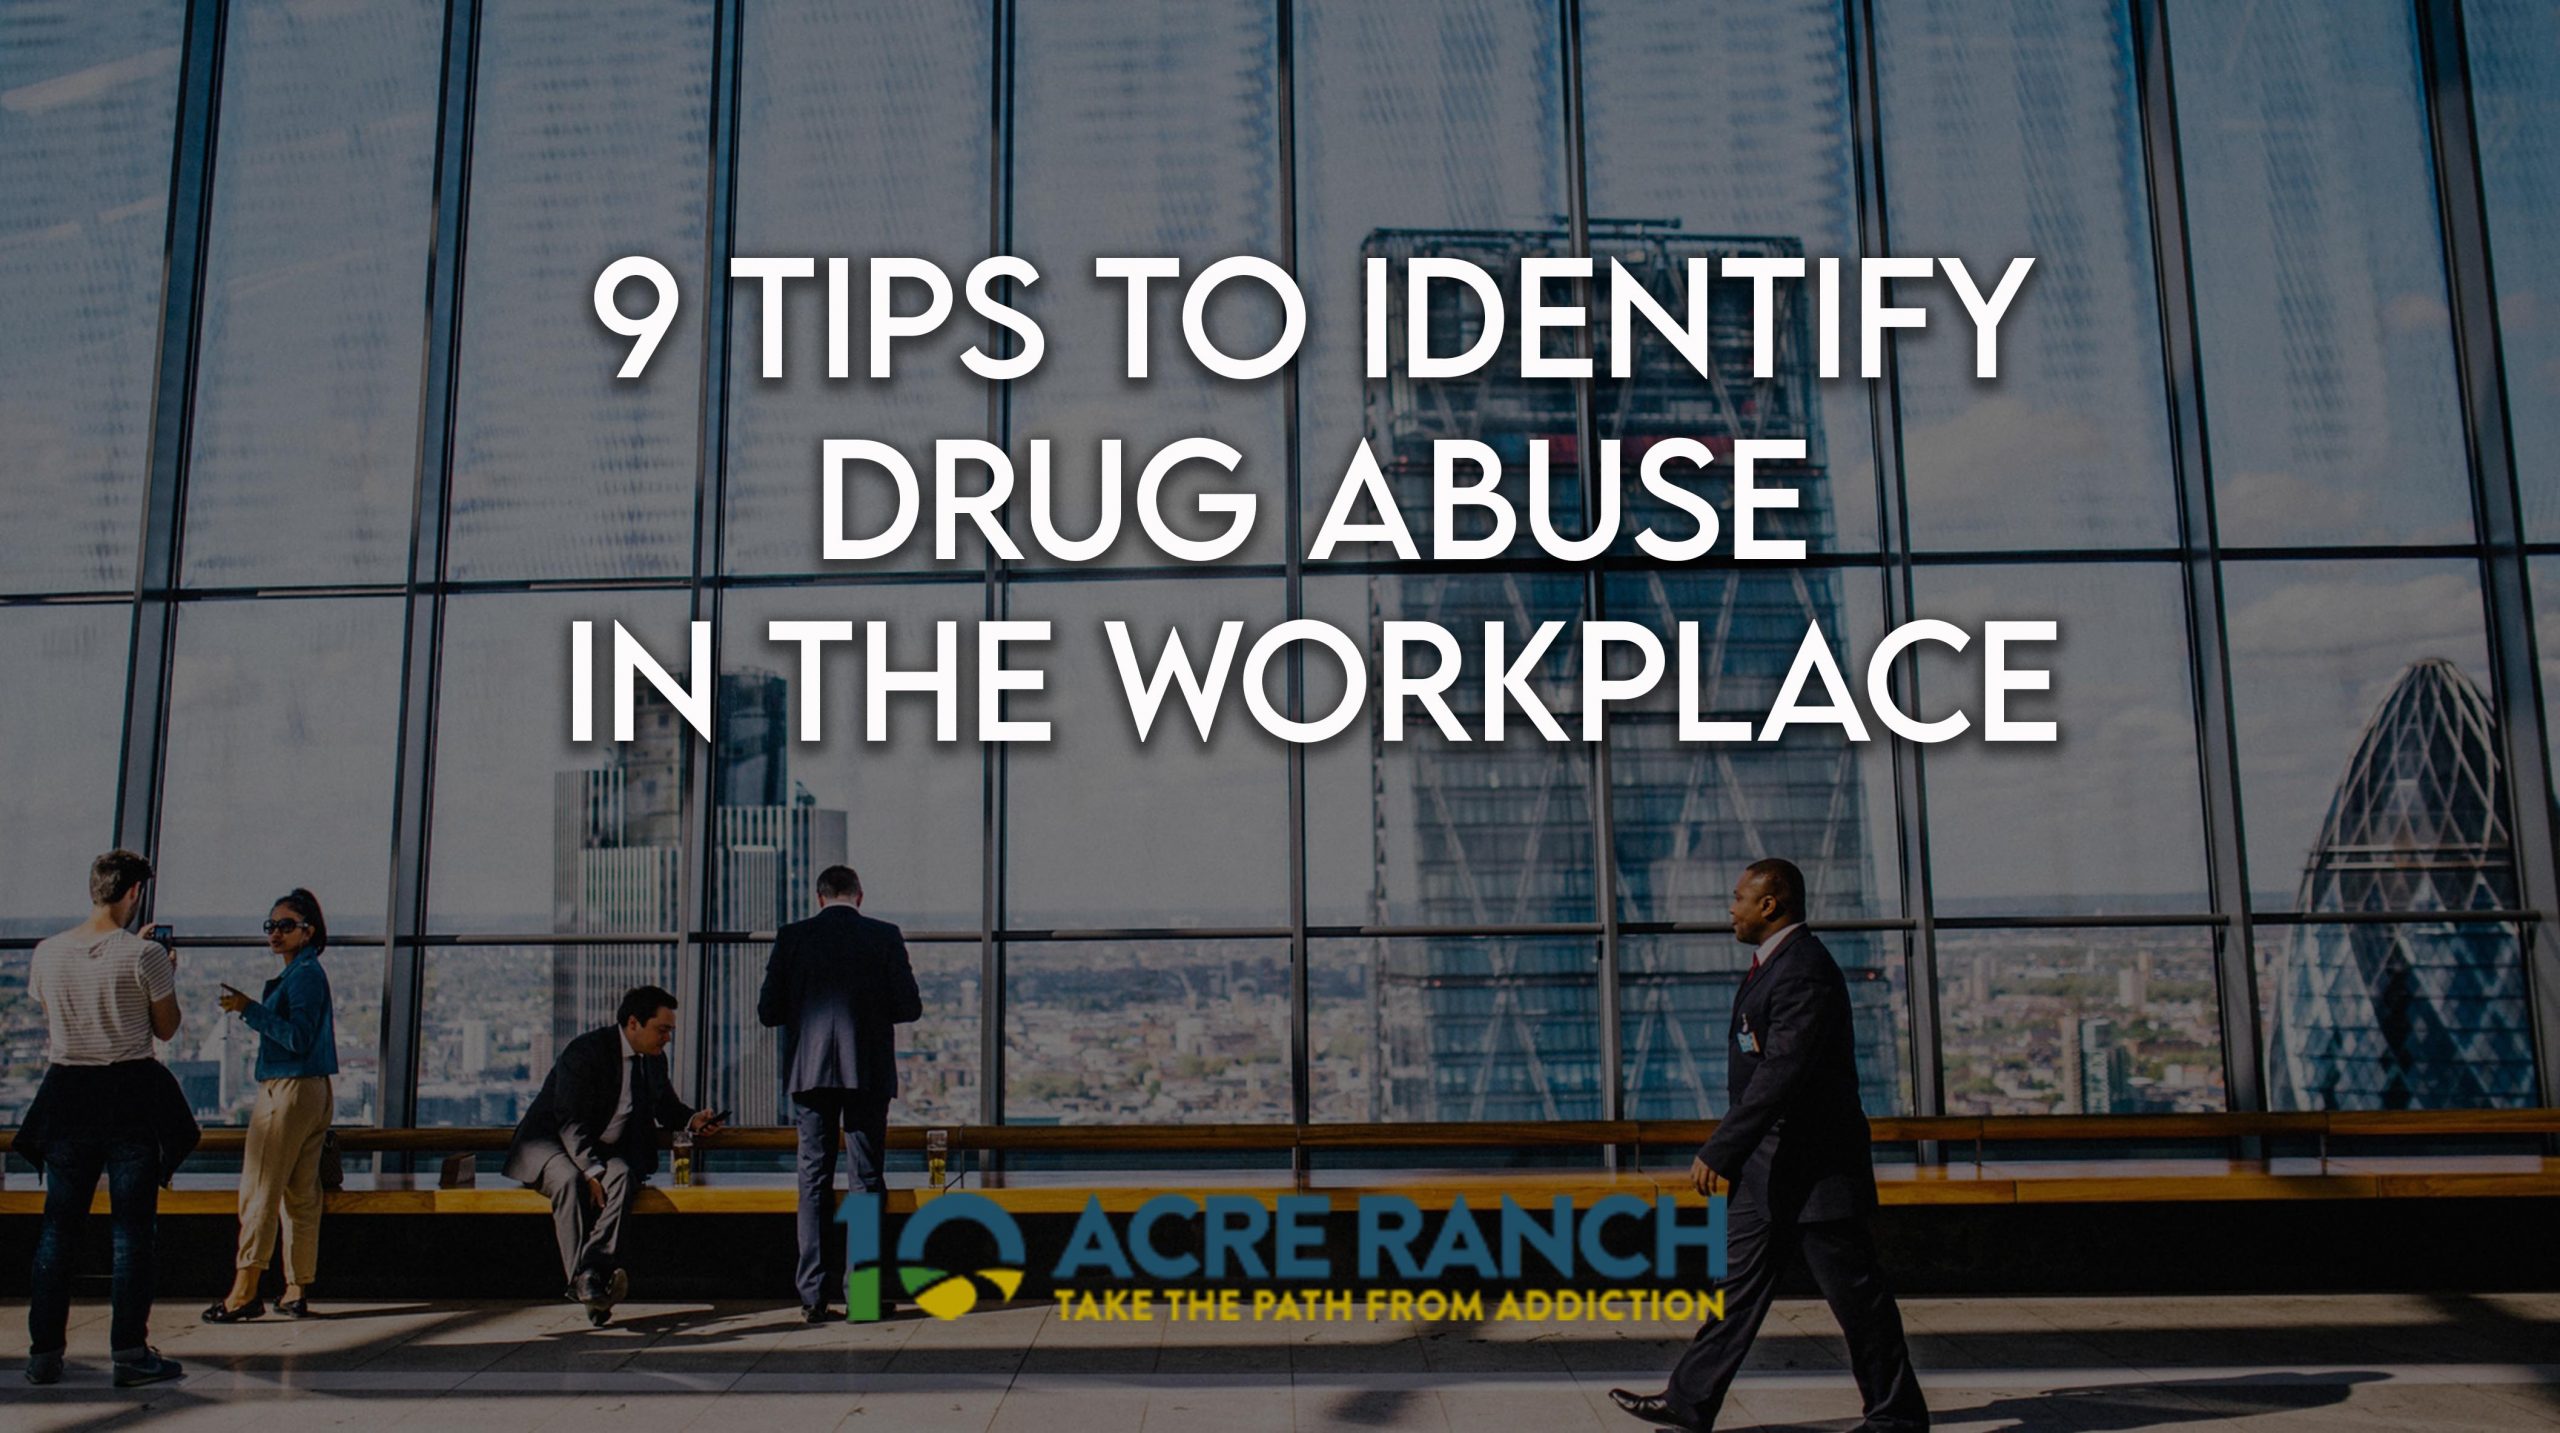 tips-to-identify-drug-abuse-in-the-workplace-drug-rehab-human-resources-helping-others